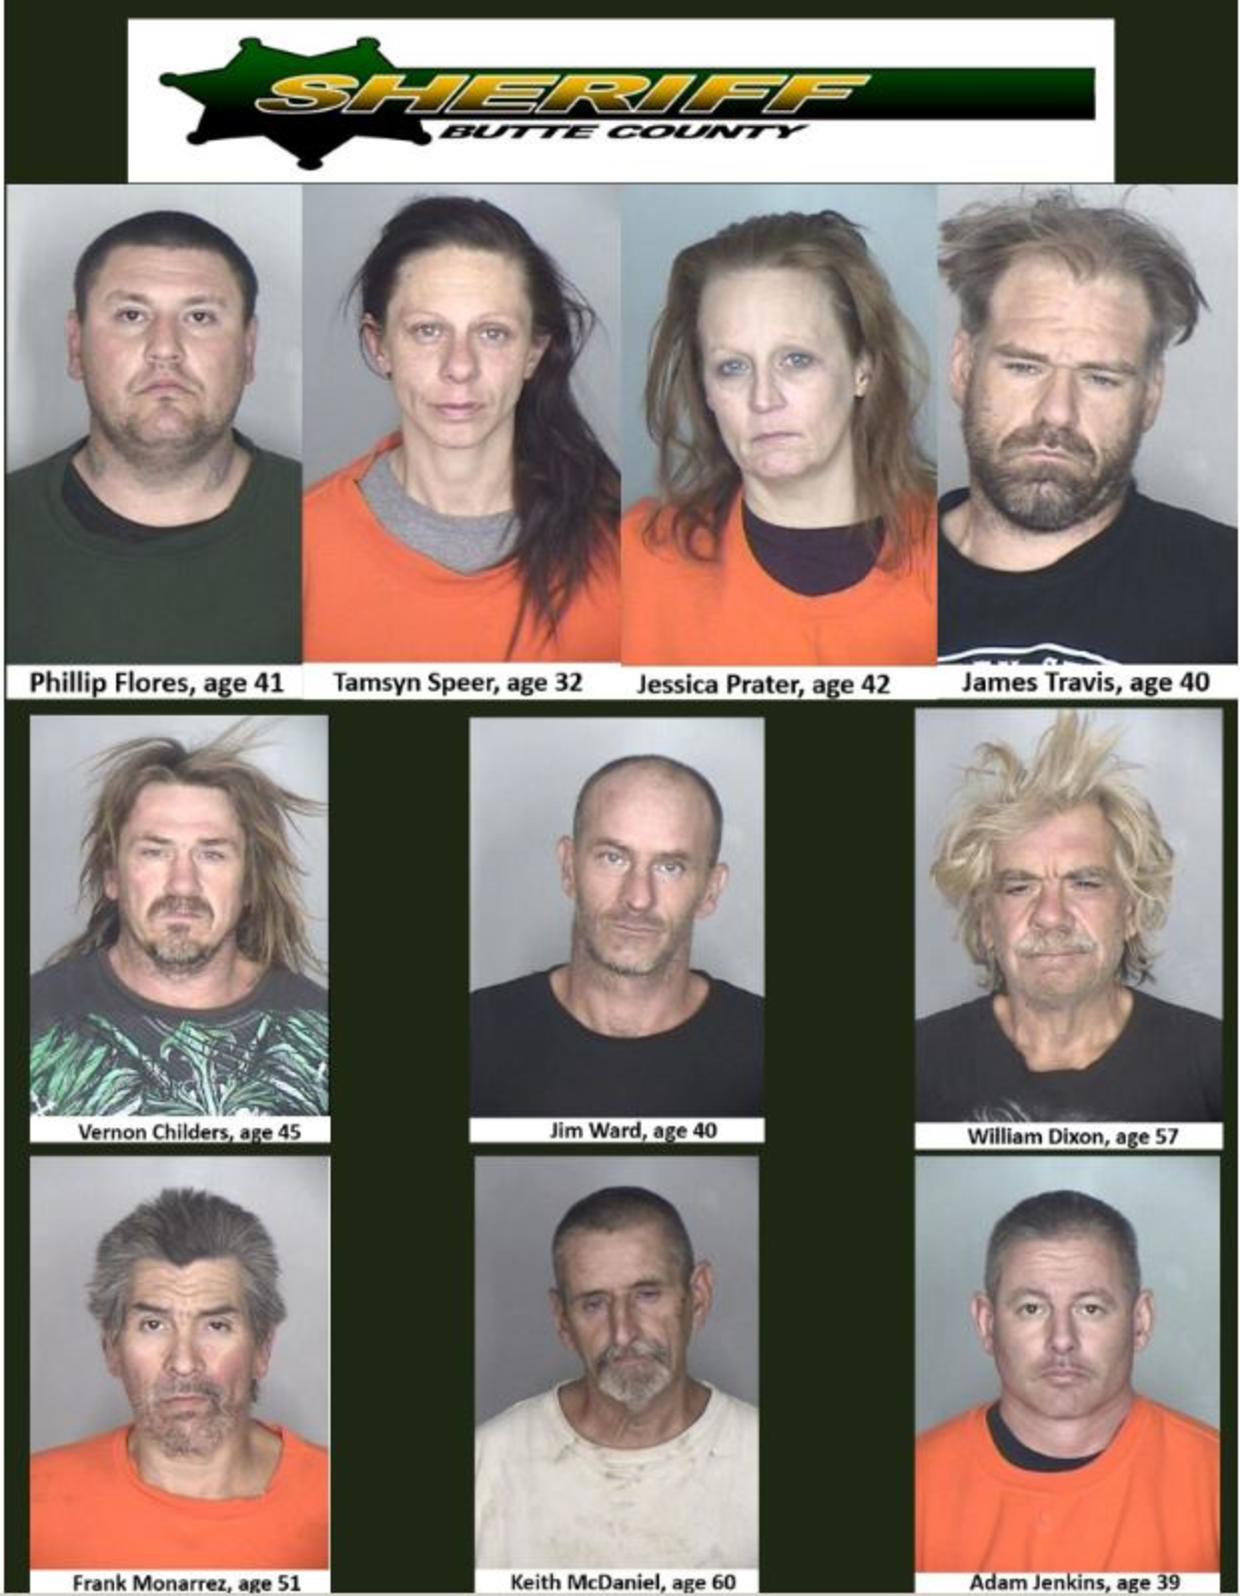 An Ordinary Oroville Traffic Stop Led To 11 Arrests Over Span Of 3 Days